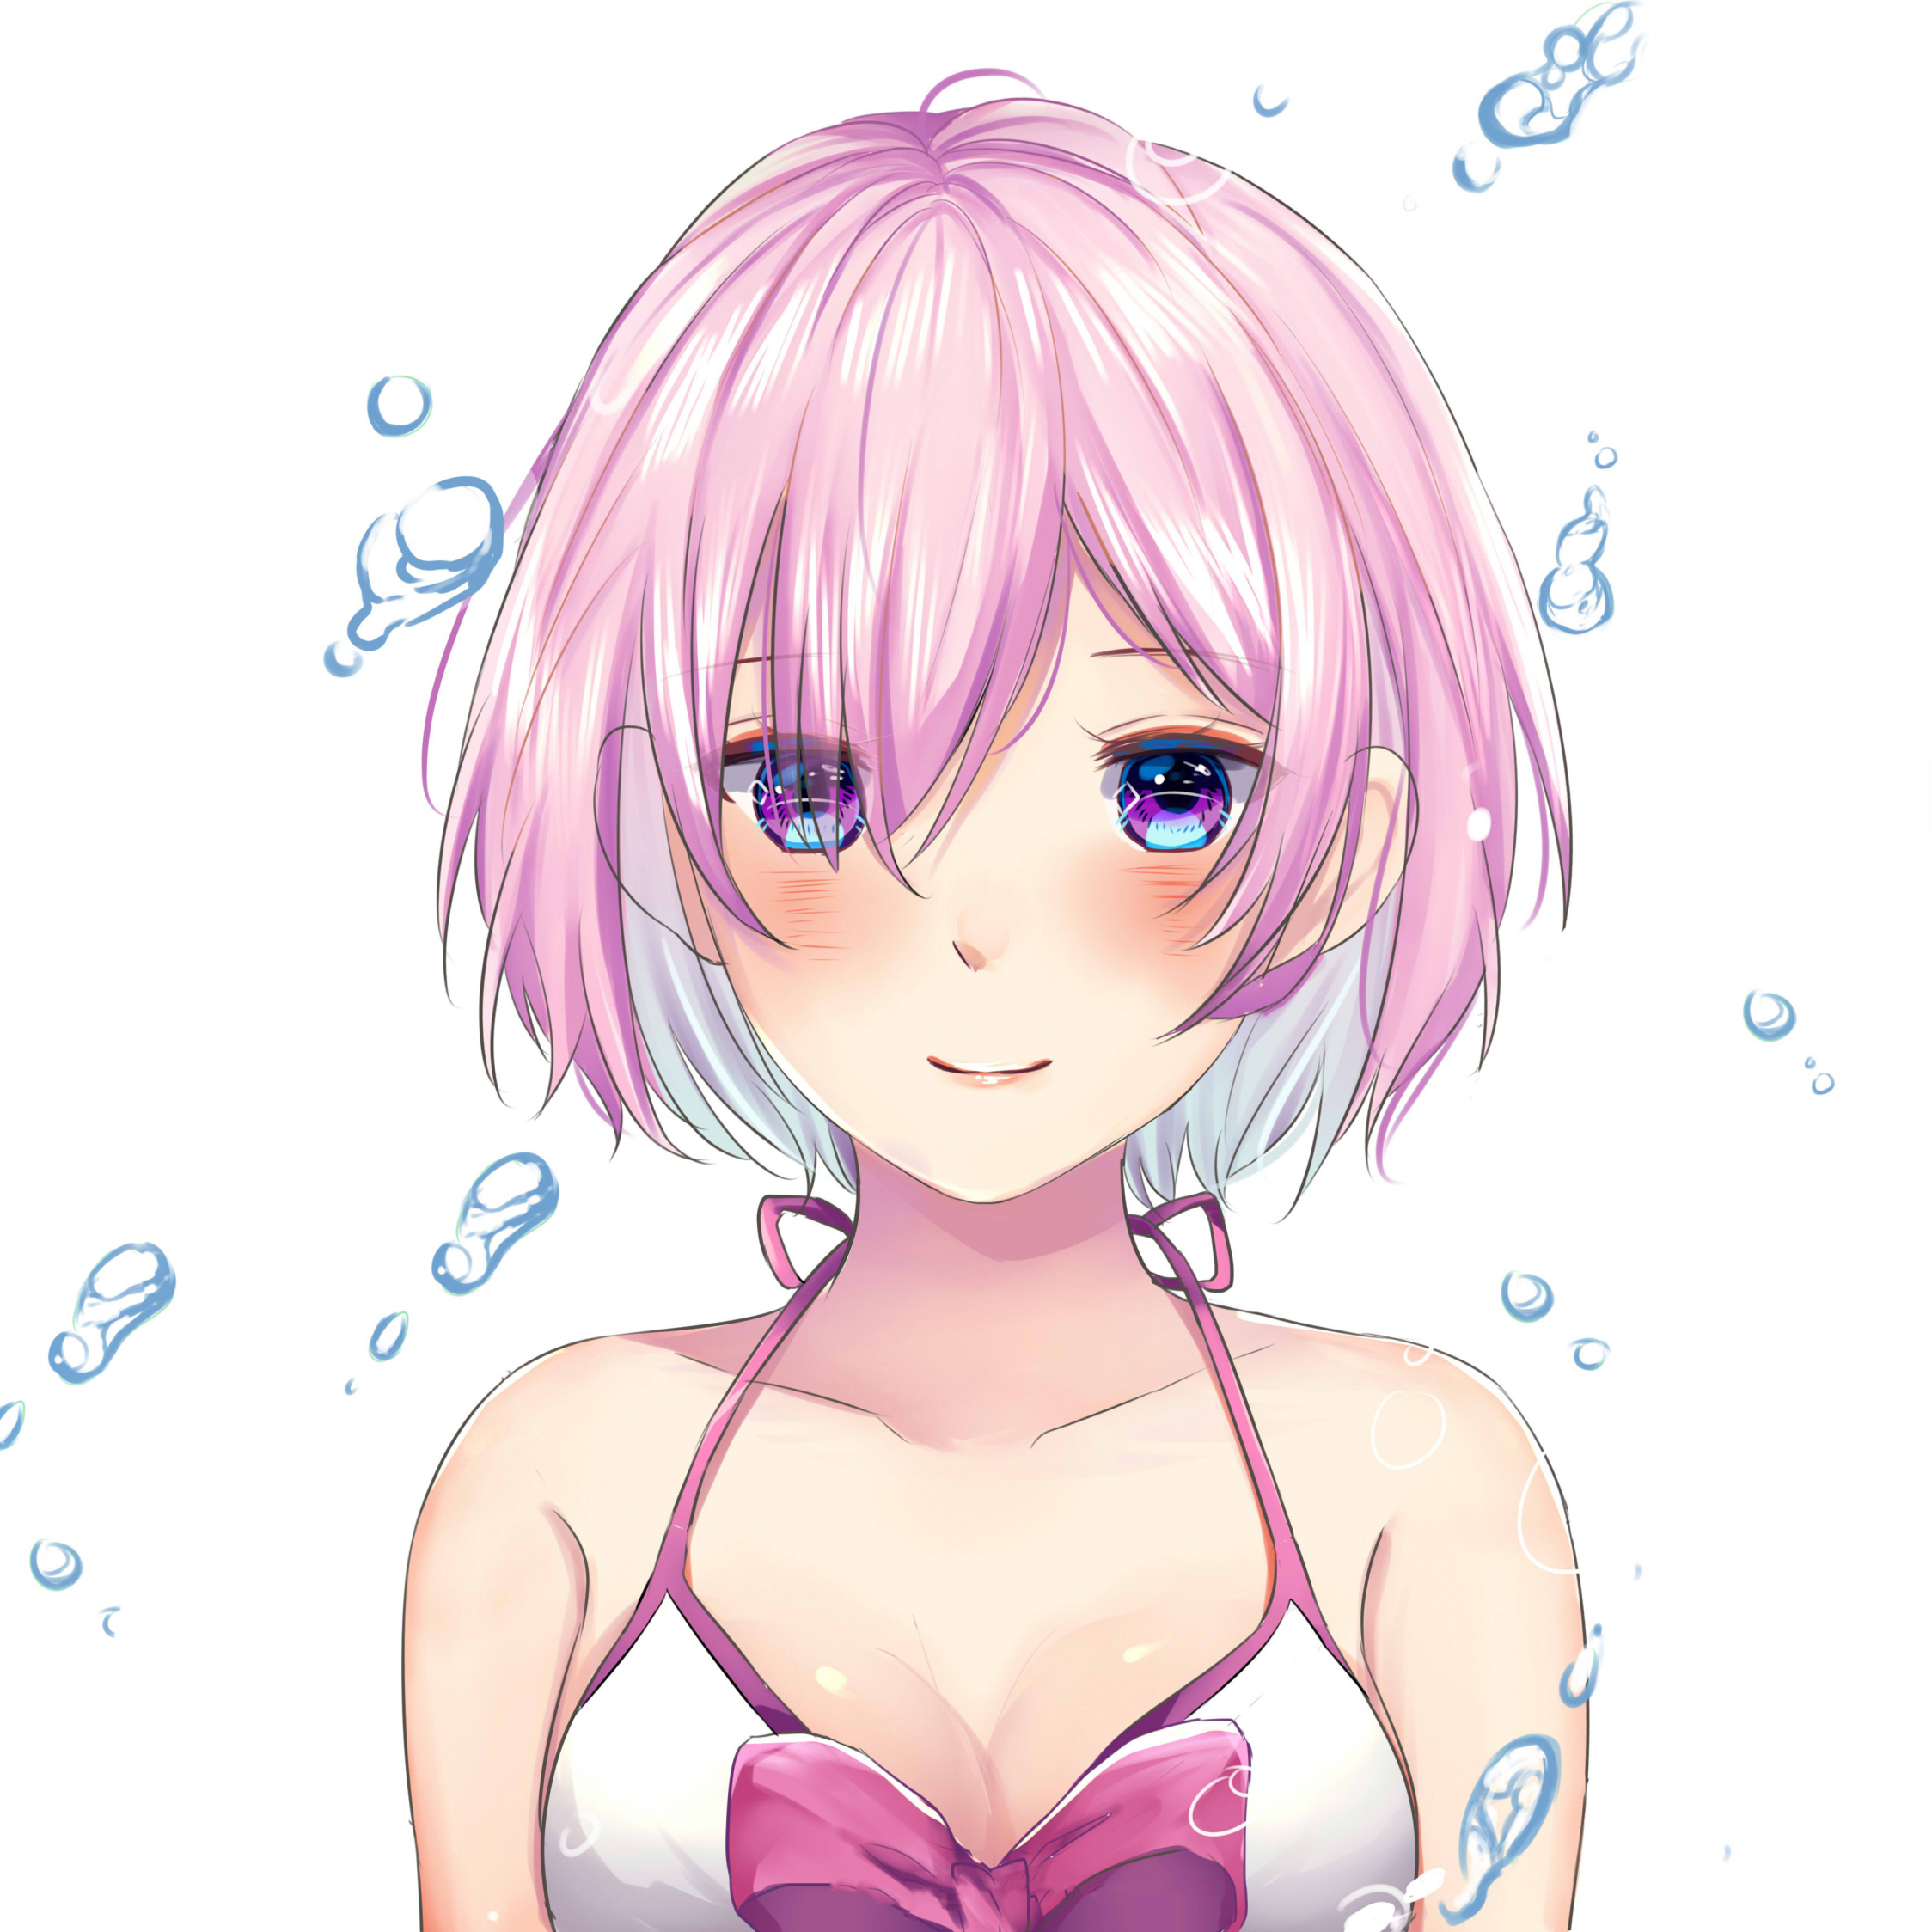 Download 2248x2248 Wallpaper Beautiful Mashu Kyrielight Fate Grand Order Water Bubbles Anime Girl Ipad Air Ipad Air 2 Ipad 3 Ipad 4 Ipad Mini 2 Ipad Mini 3 2248x2248 Hd Image Background 2282